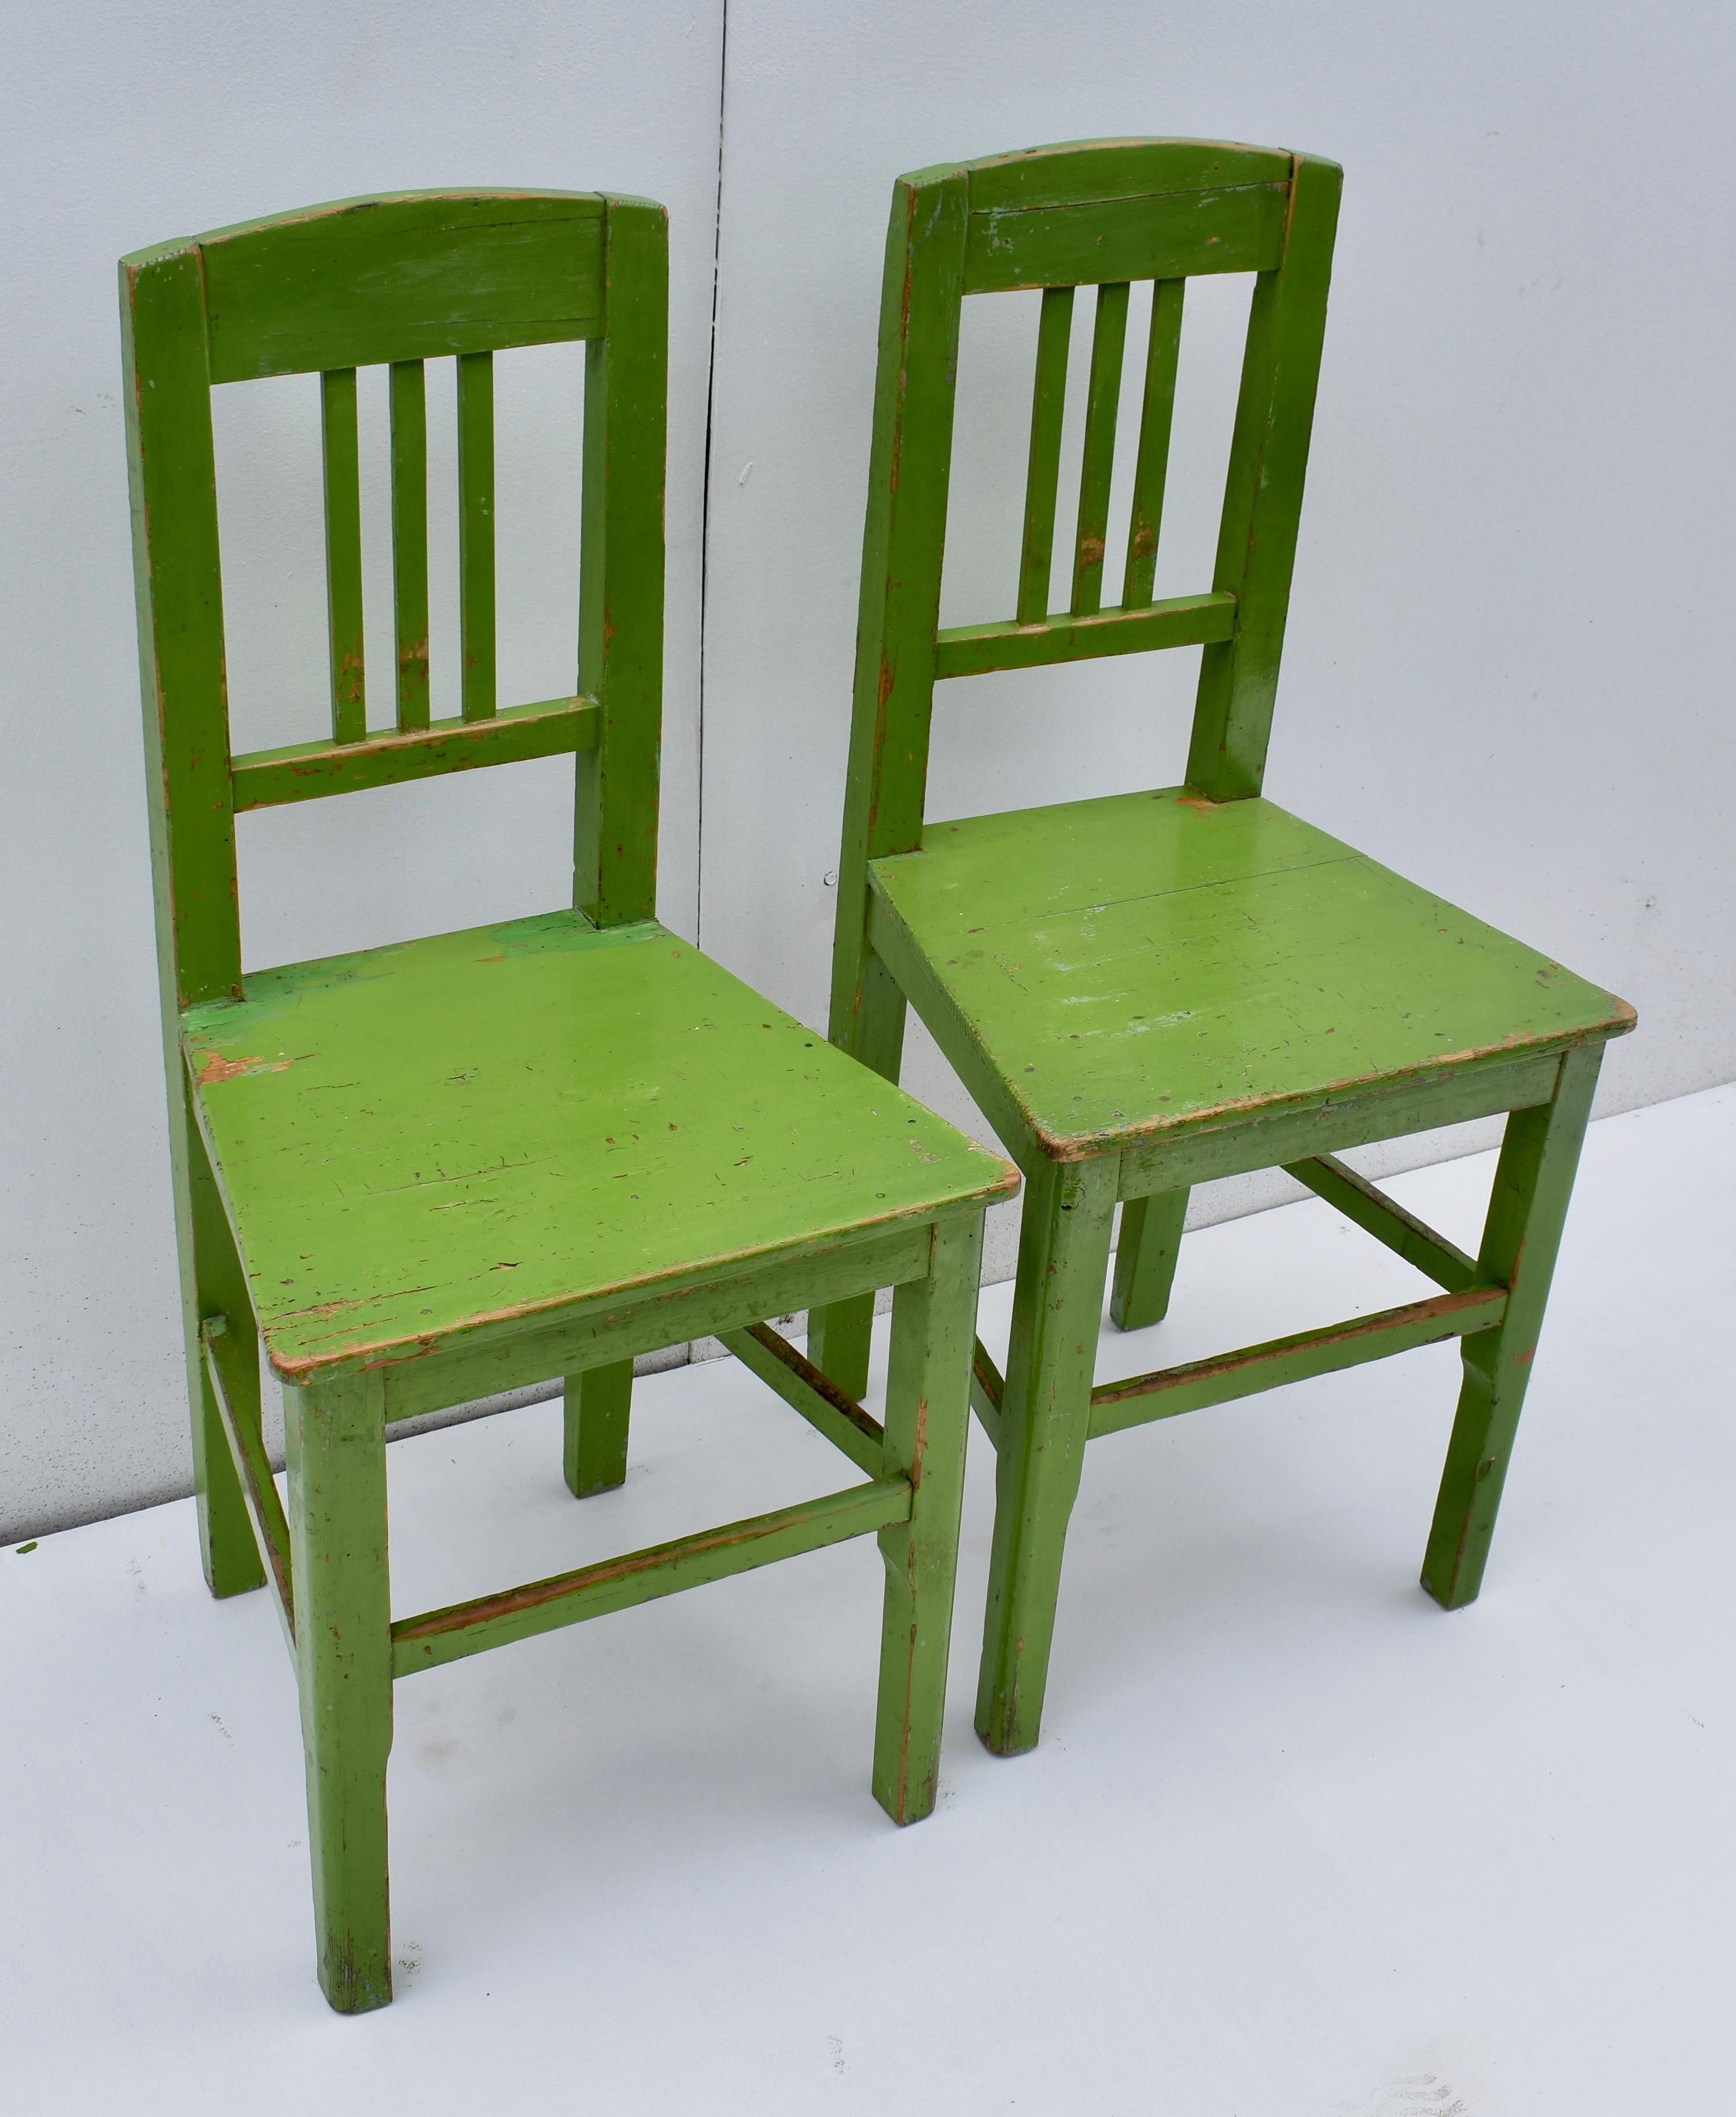 Set of Three Painted Pine Plank-Seat Chairs In Good Condition For Sale In Baltimore, MD